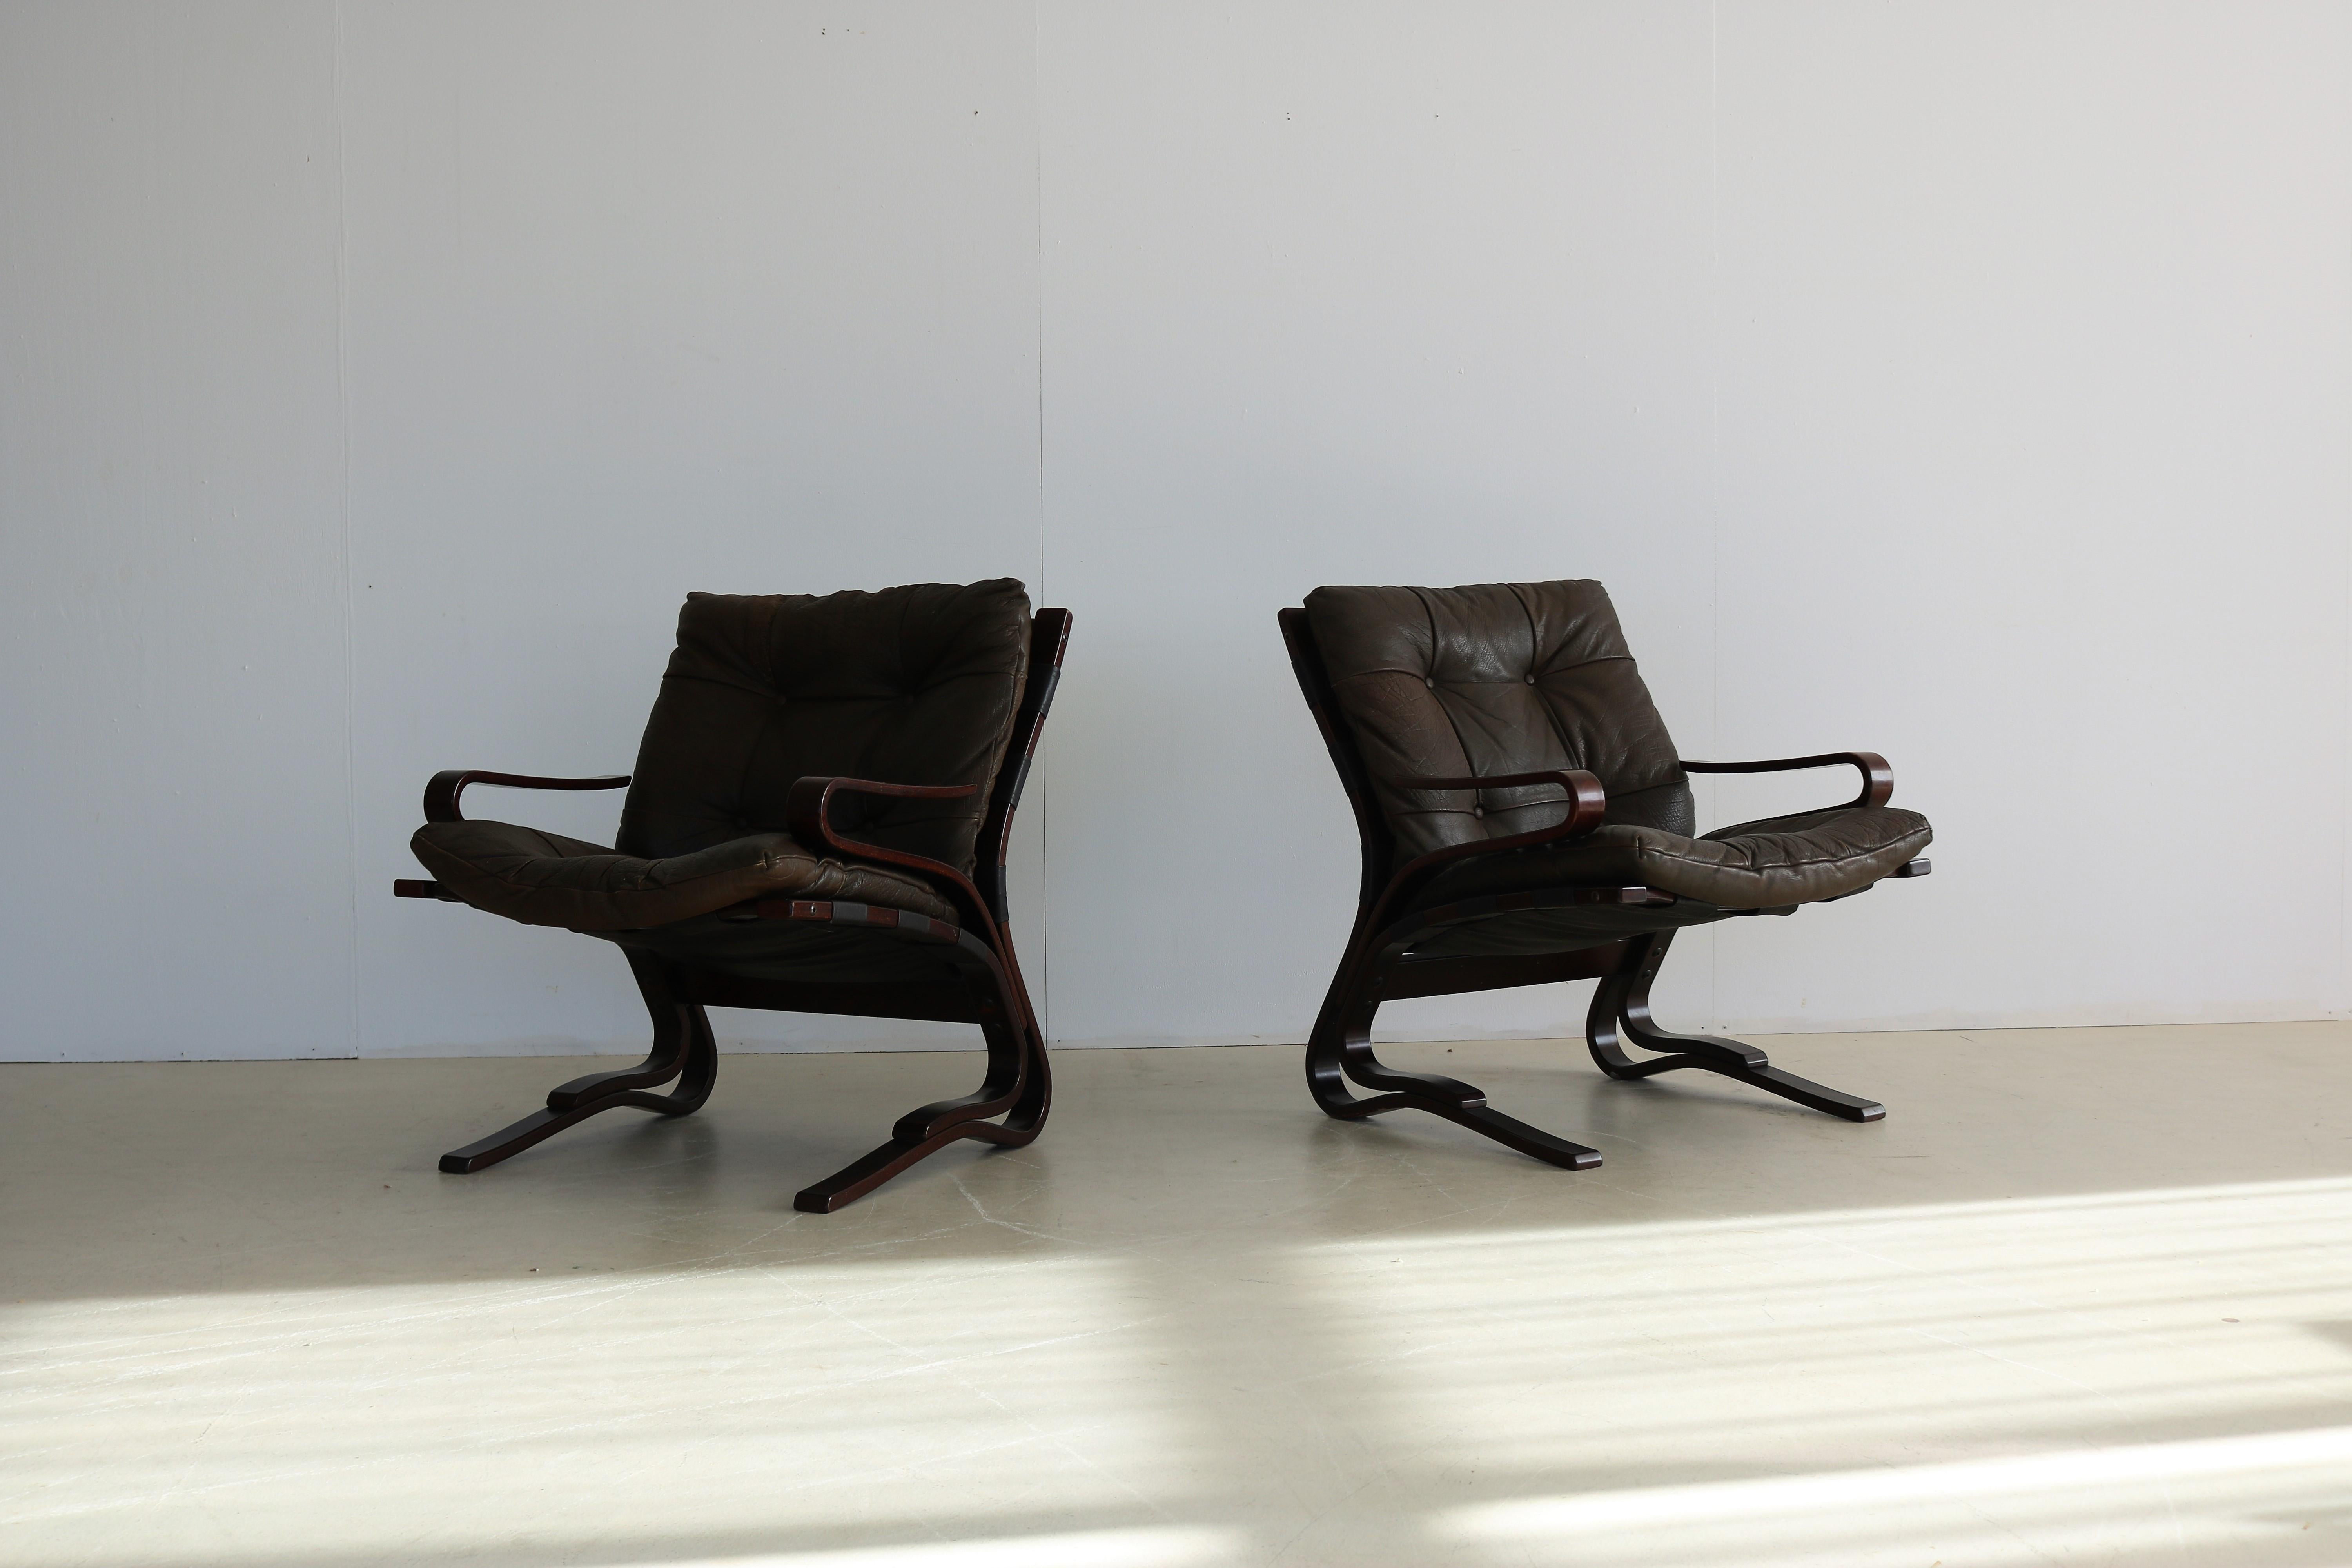 Vintage armchairs Hove Mobler Skyline chair Danish

Period 60's
Designs Einar Hove Hove Mobler Skyline Denmark
Conditions good light signs of use
Size 80 x 64 x 80 (hxwxd) seat height 45 cm.

Details rosewood; leather; set of 2; 

Article